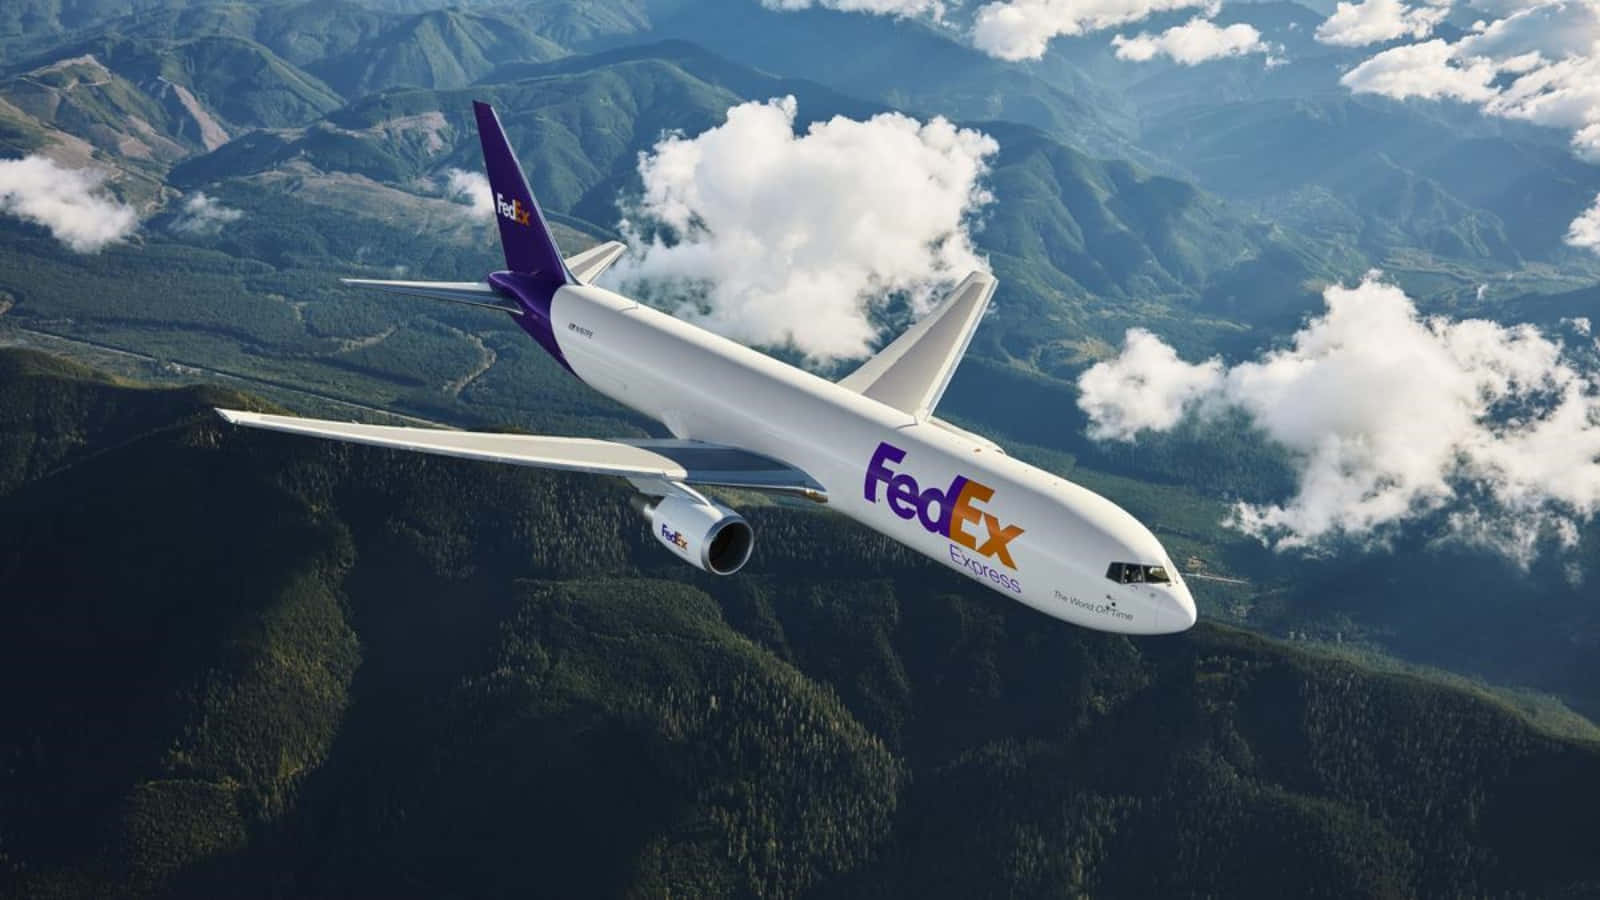 Fedex - A Jet Flying Over Mountains